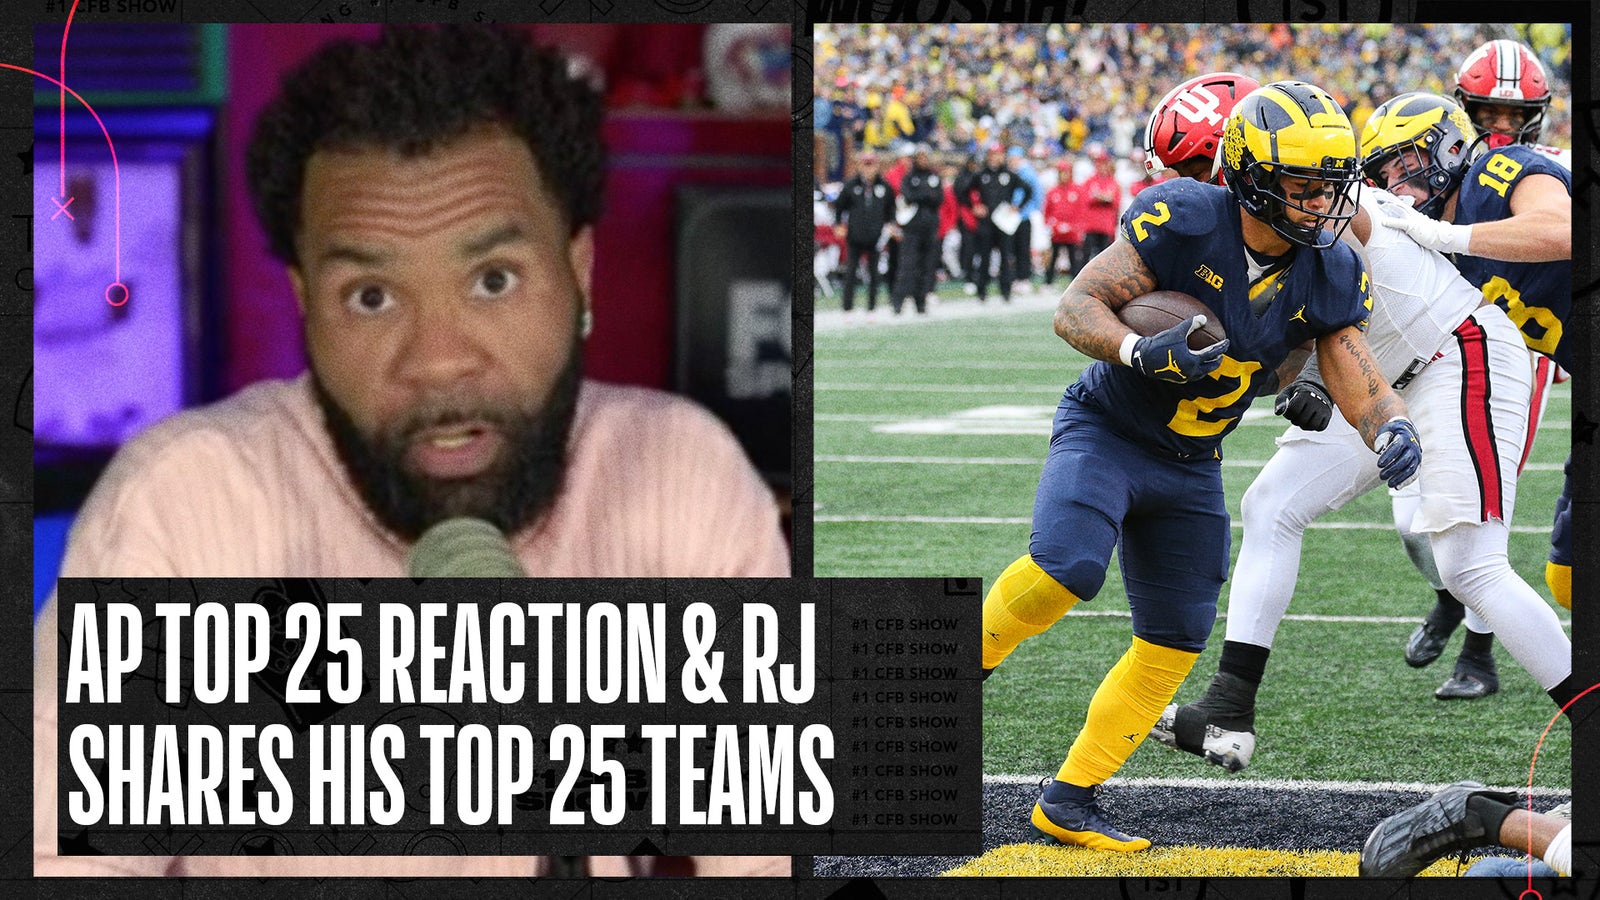 RJ Young reacts to the AP Poll and shares his top 25 teams